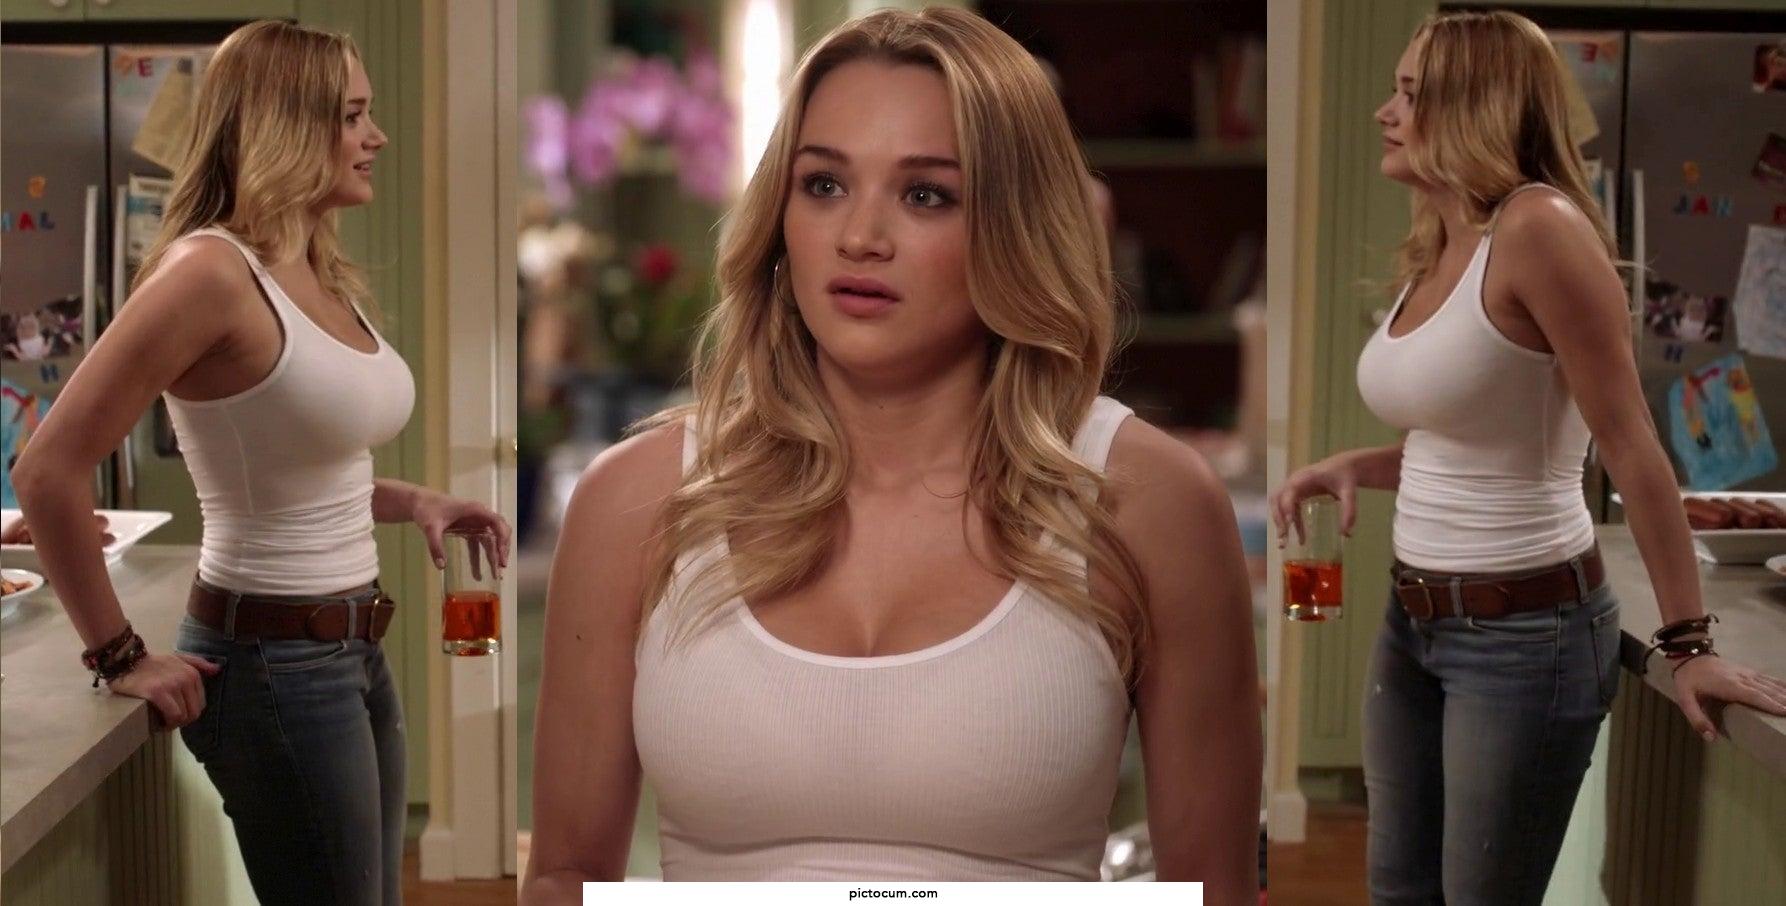 Hunter King's rack would be fun to feel up and fuck during the party